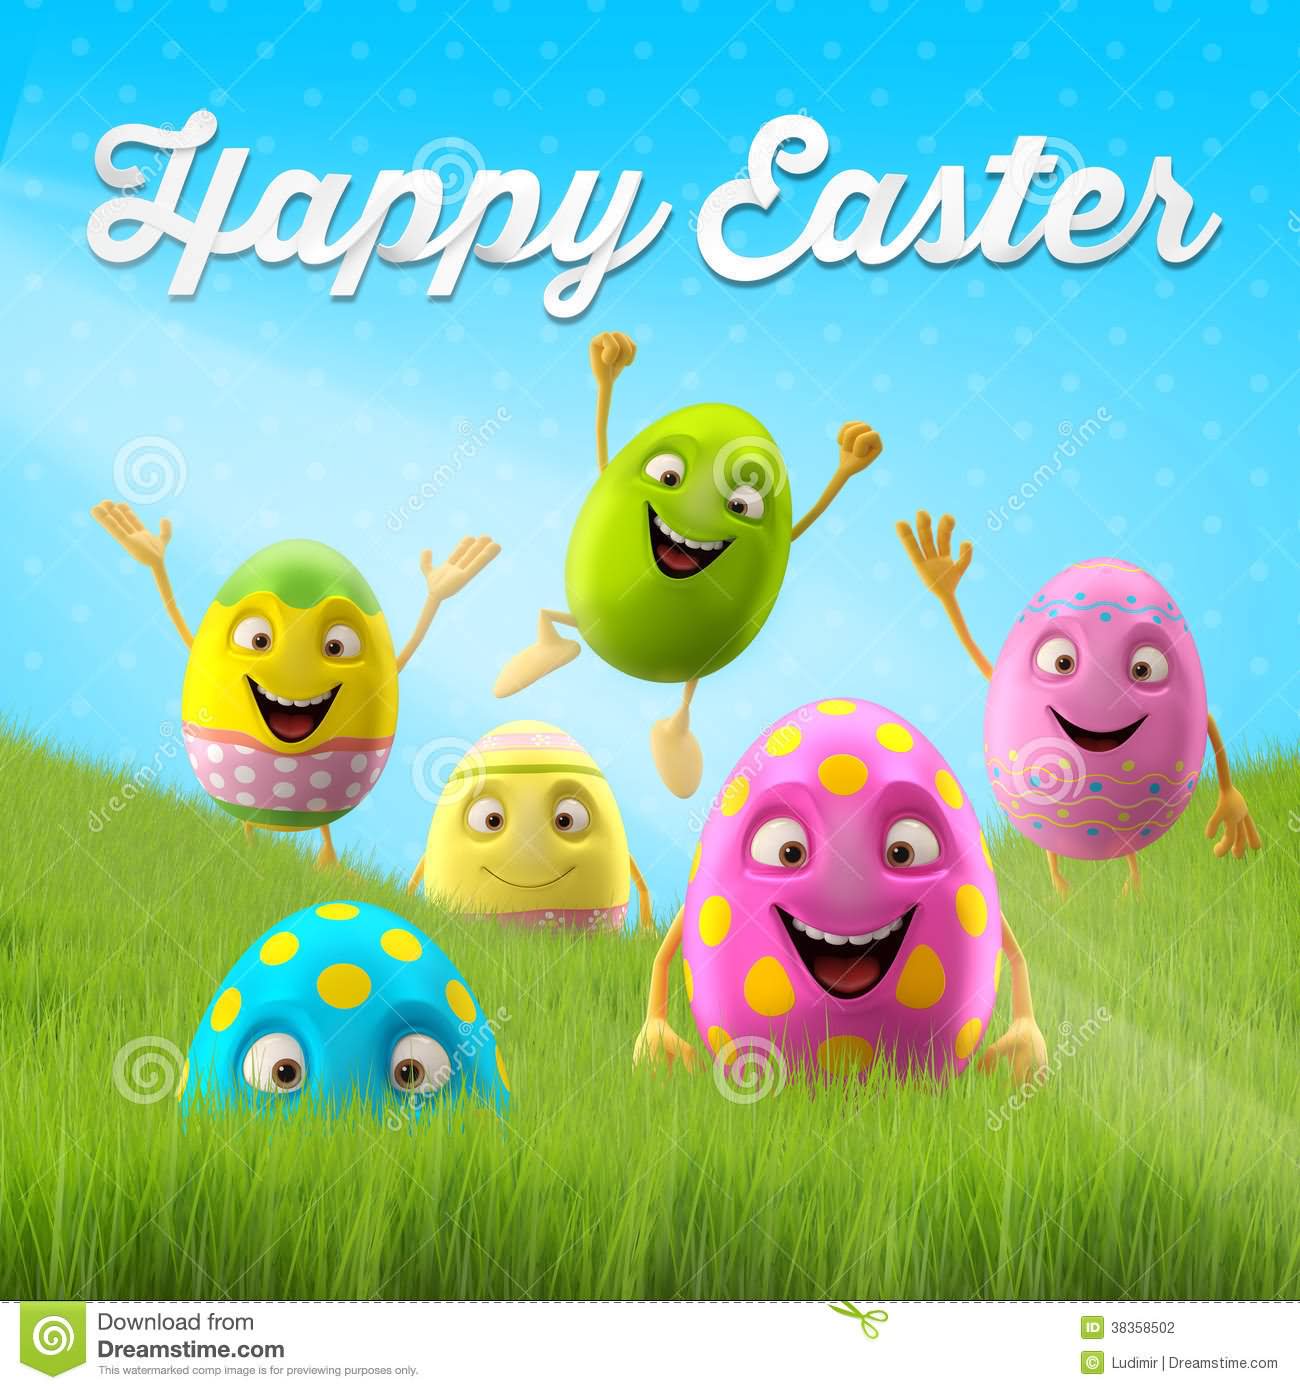 Happy Easter Beautiful Smiling Eggs Picture